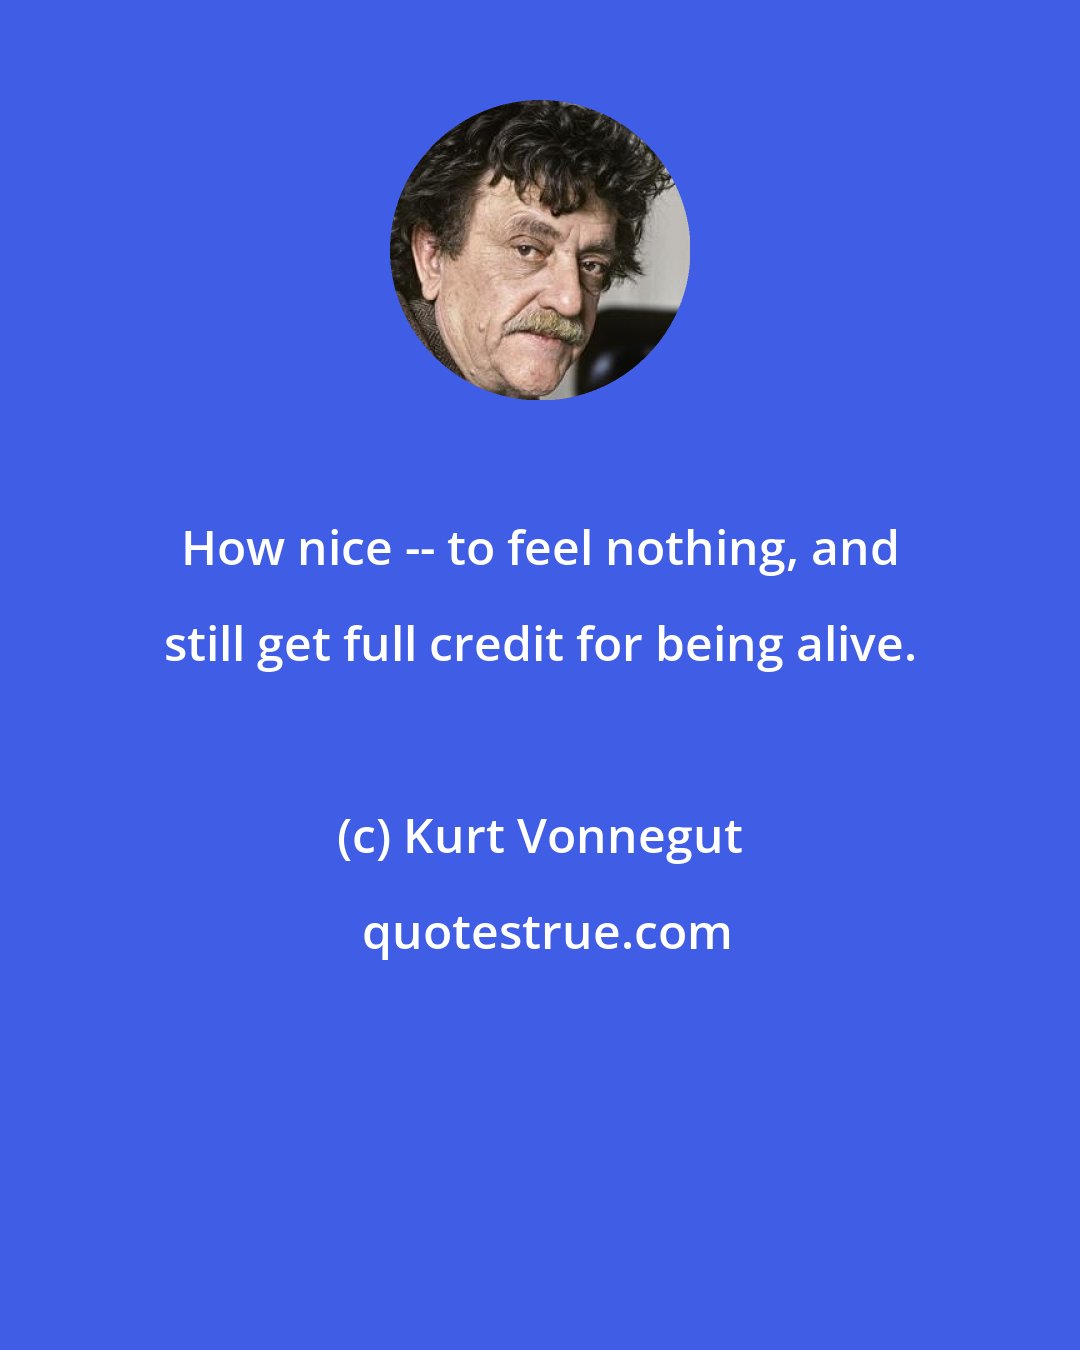 Kurt Vonnegut: How nice -- to feel nothing, and still get full credit for being alive.